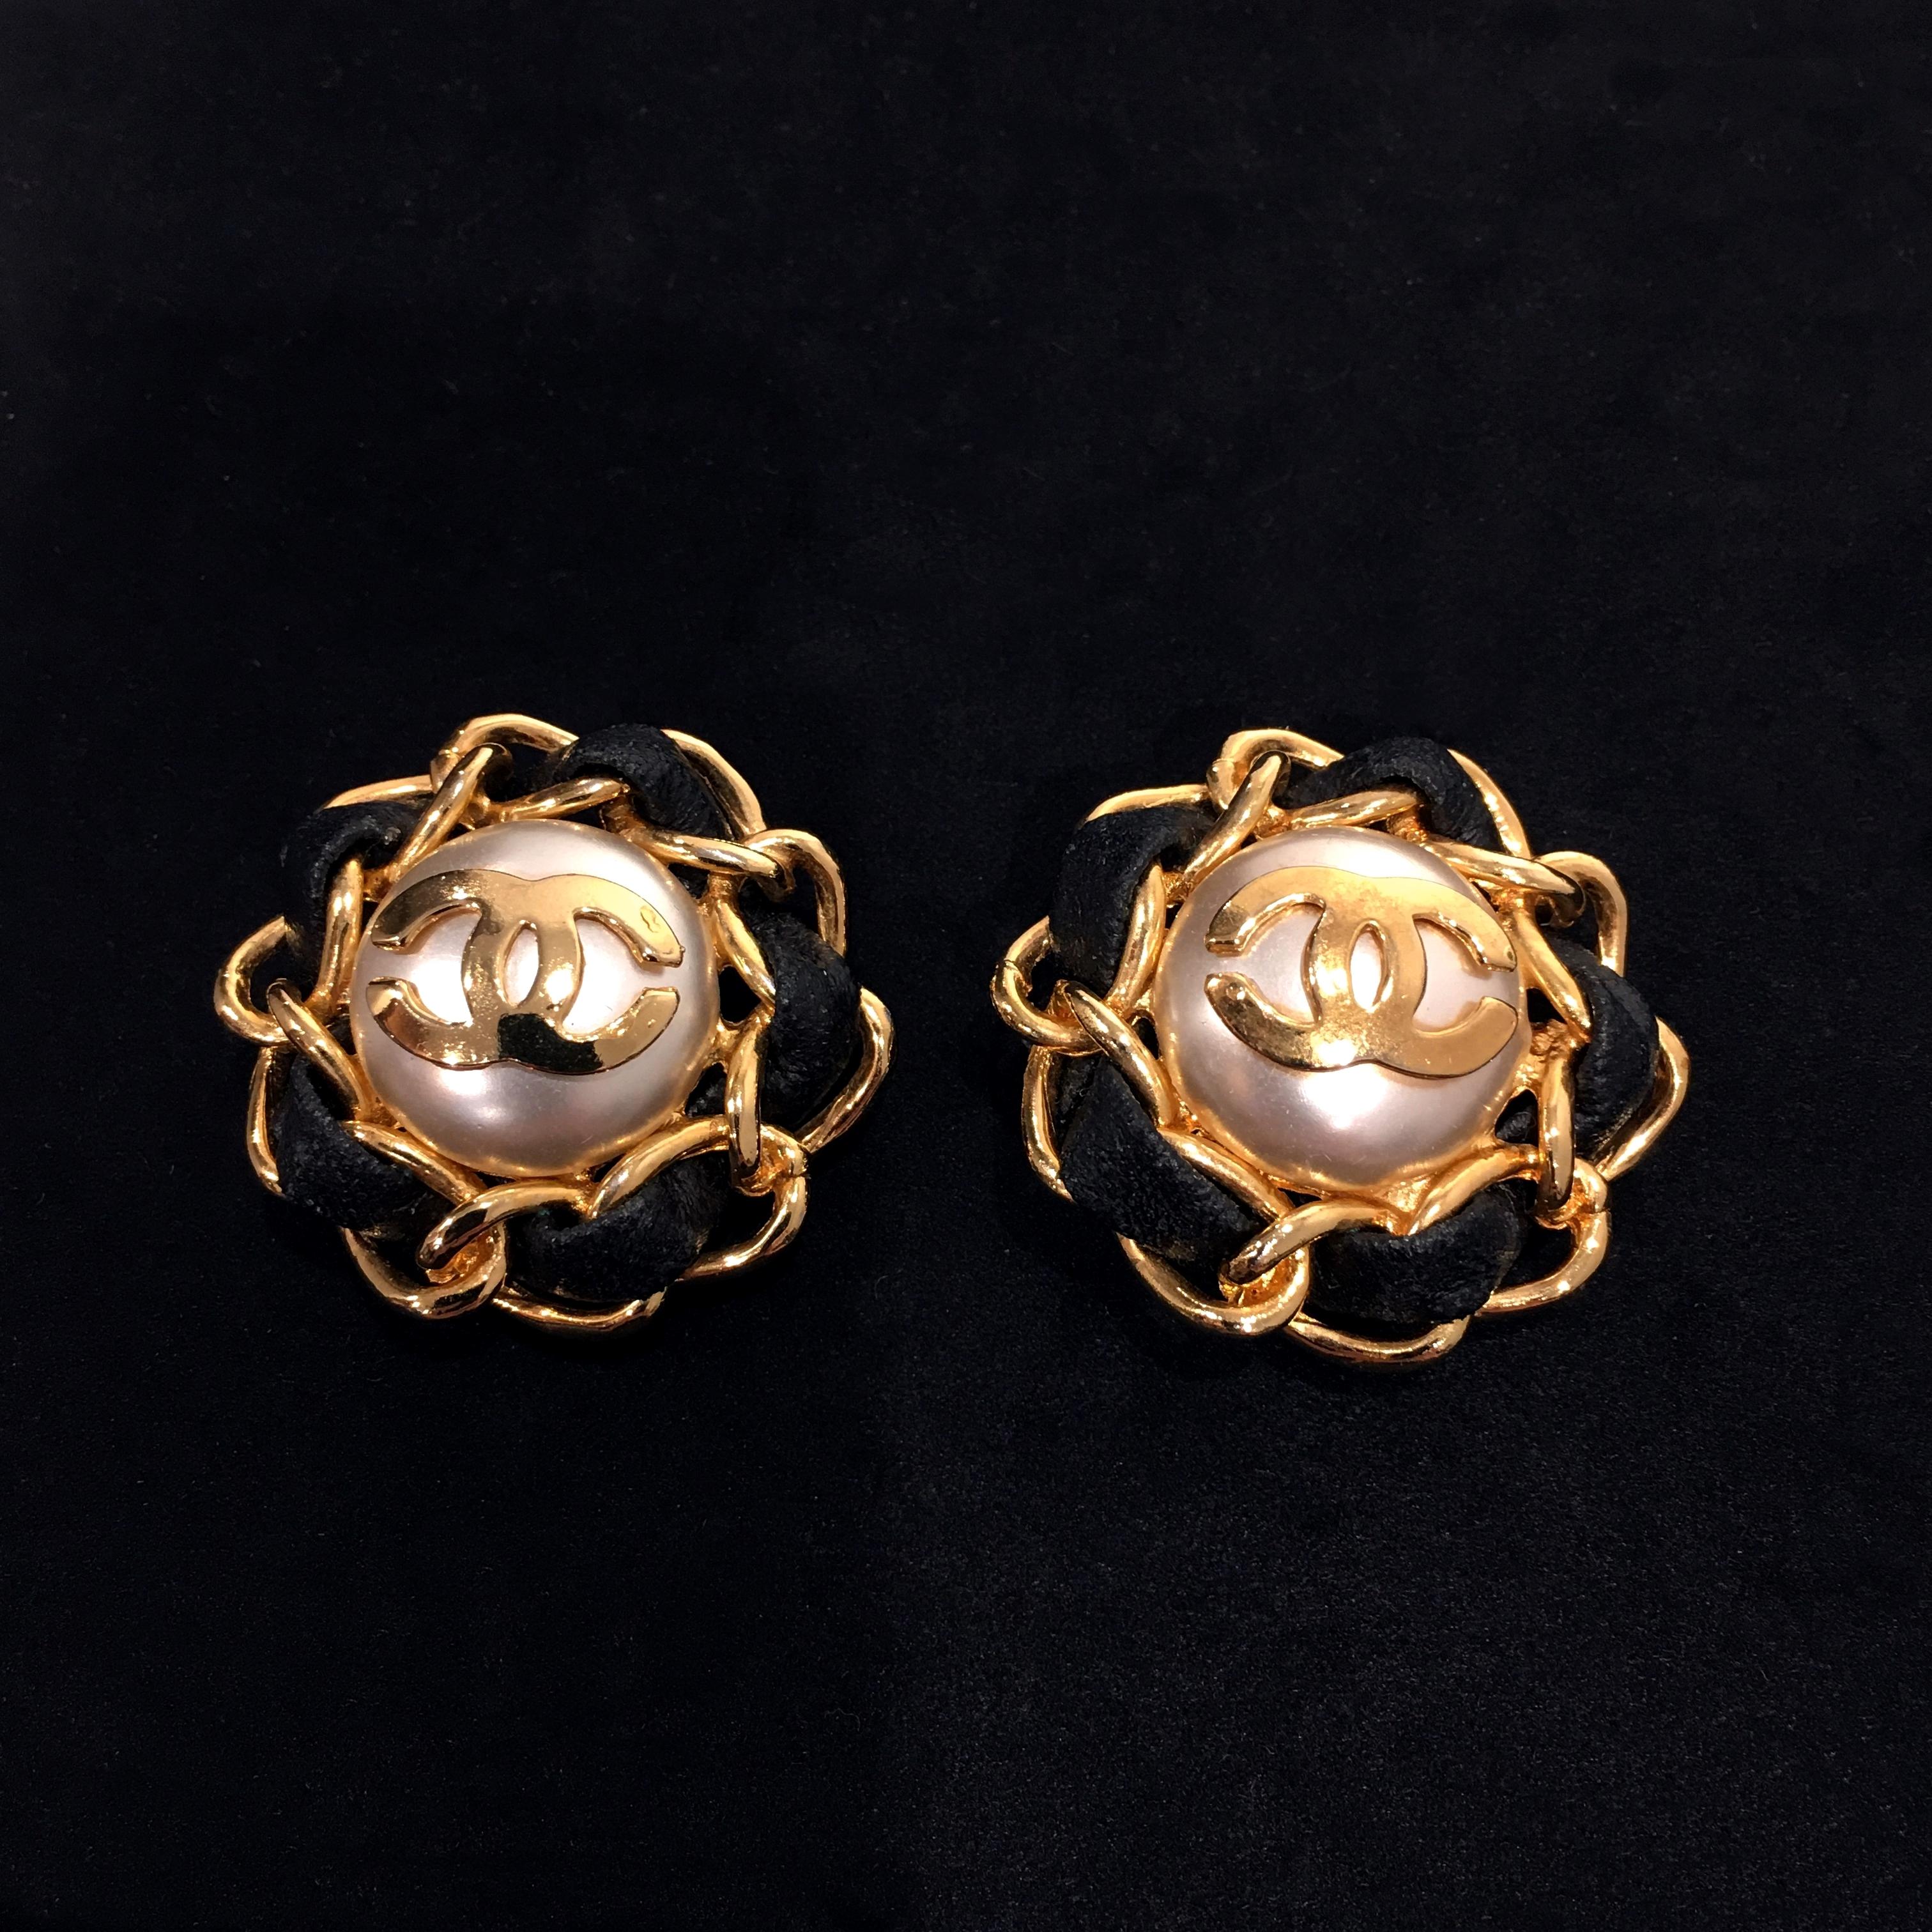 Brand : Chanel
Reference : JW387
Measurement of Earrings : 3.5cm x 3.5cm
Material : Gilt Metal
Year : 1980’s
Made in France

Please Note: the jewelries are guarantee 100% authentic pre-owned therefore might have signs of tarnish or oxidation ,